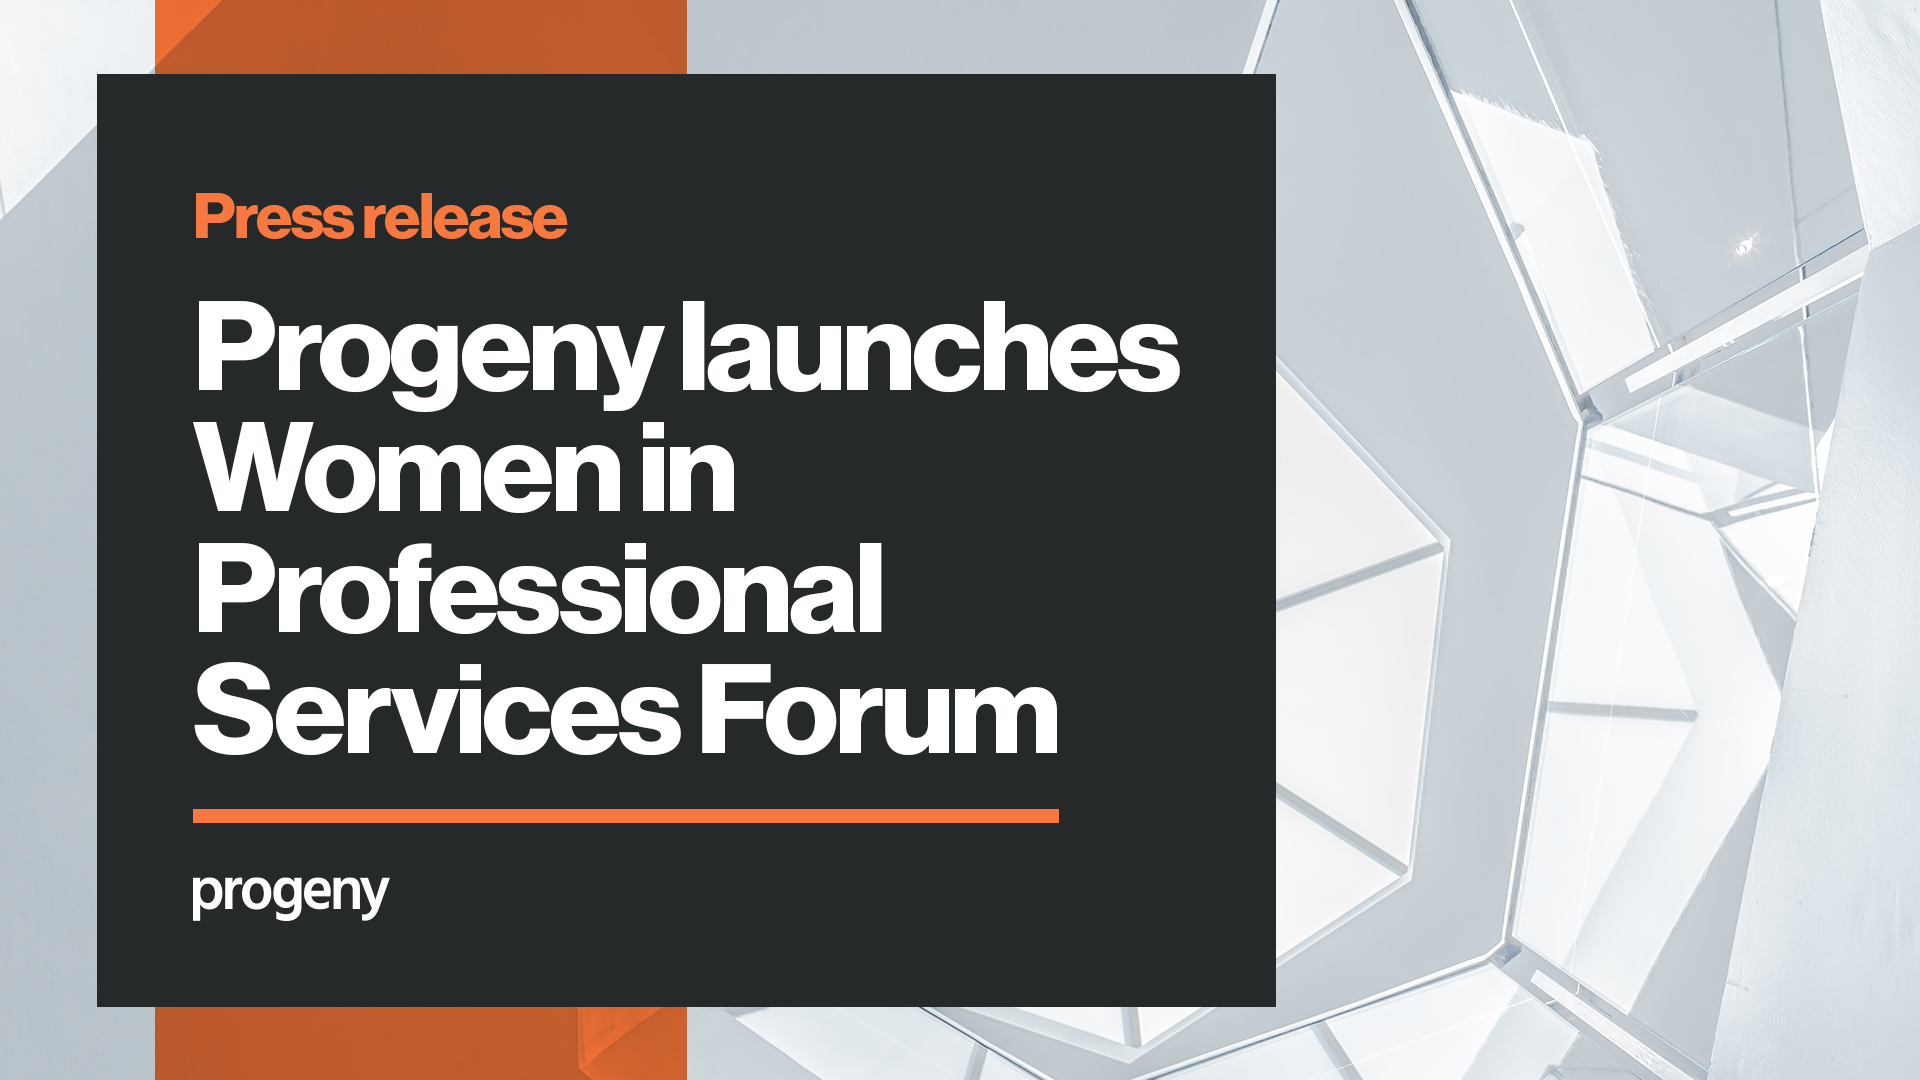 Progeny launches women in professional services forum